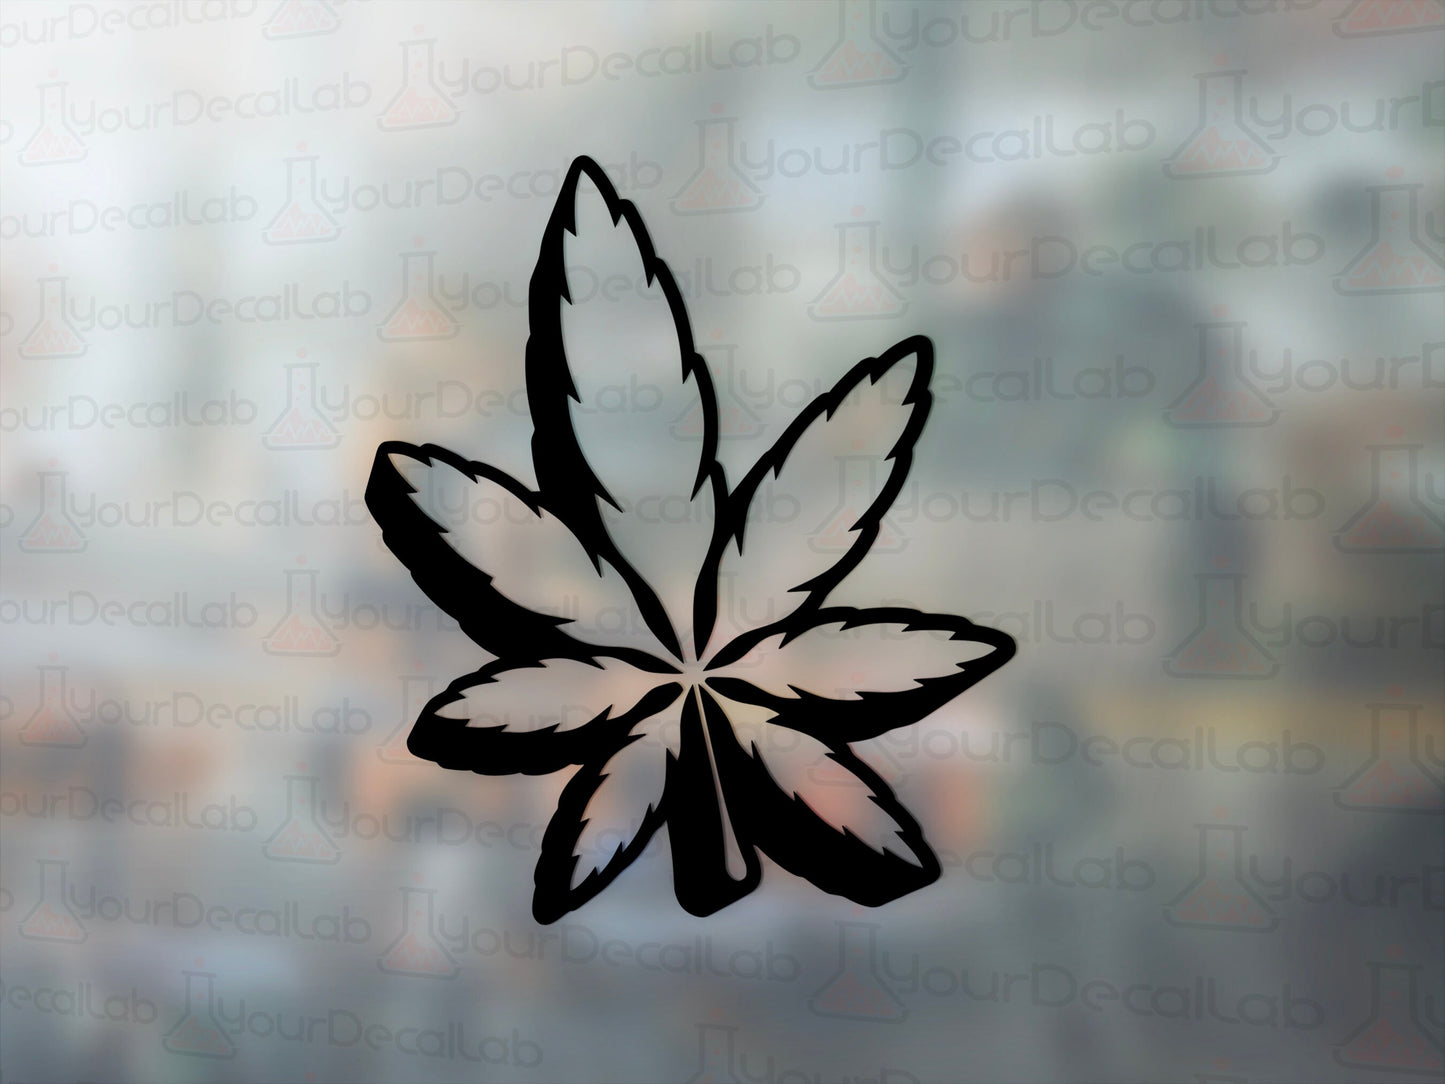 Mary Jane Decal - Many Colors & Sizes